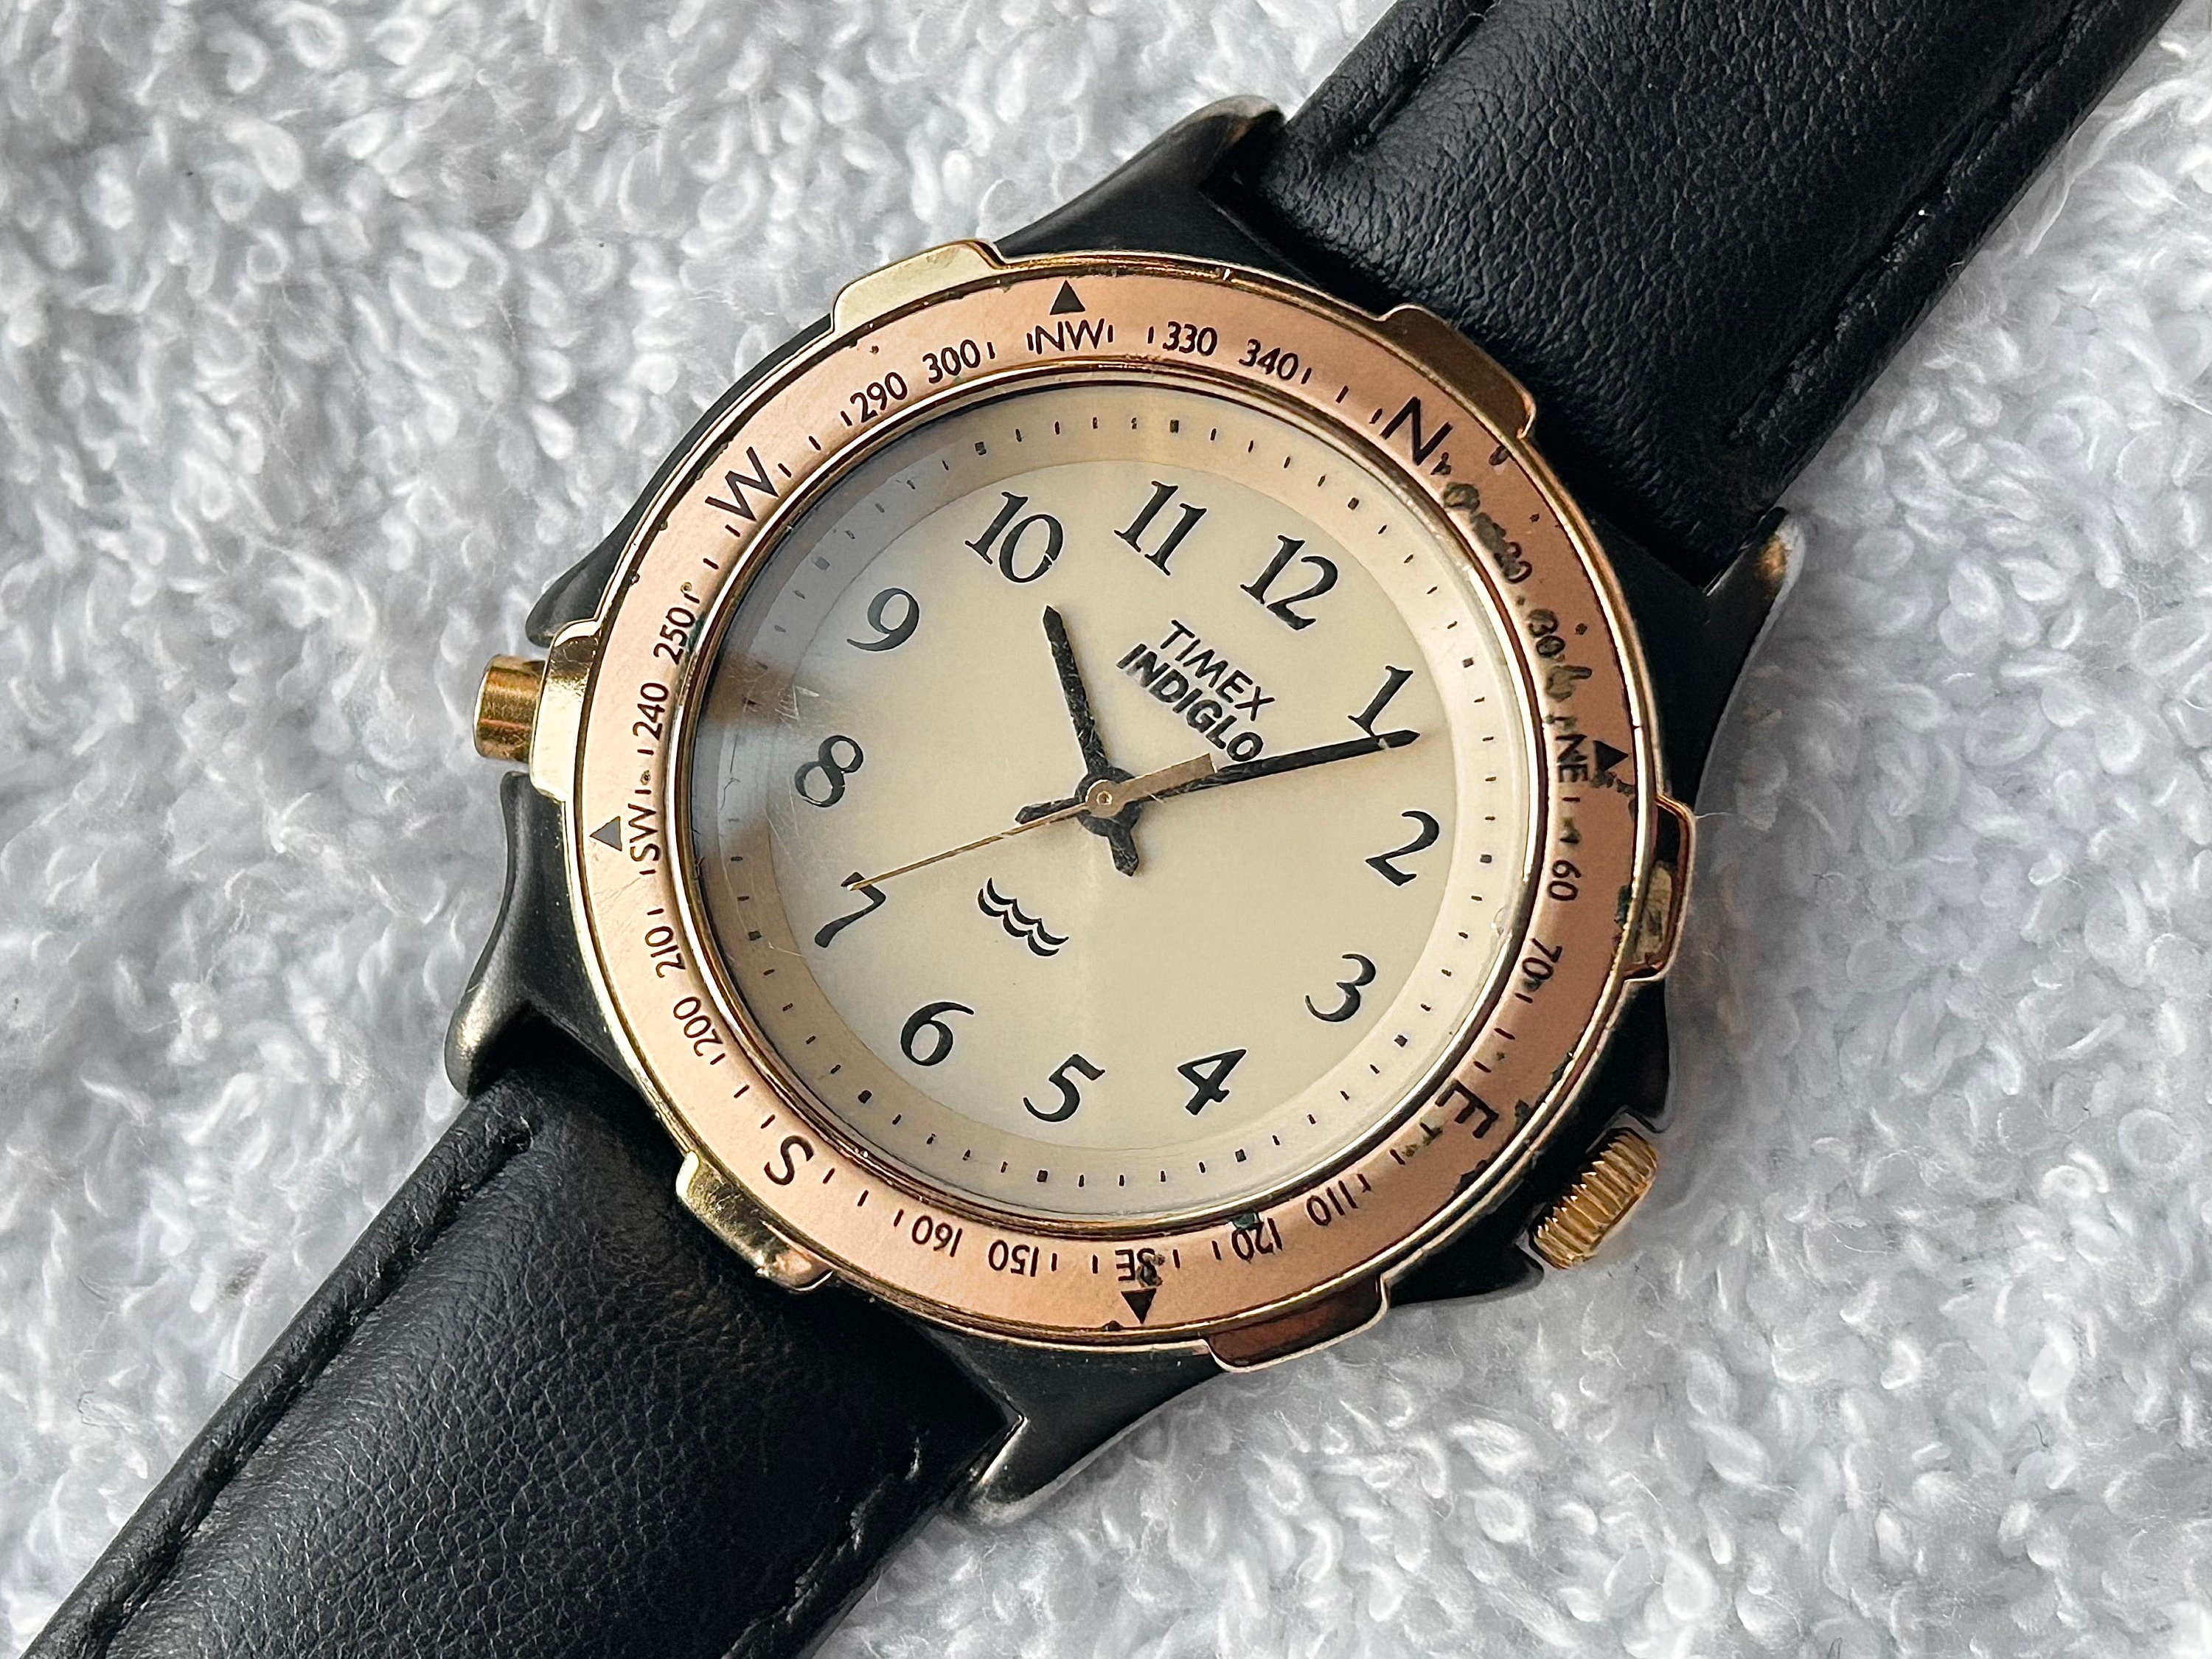 timex indiglo 2個セット